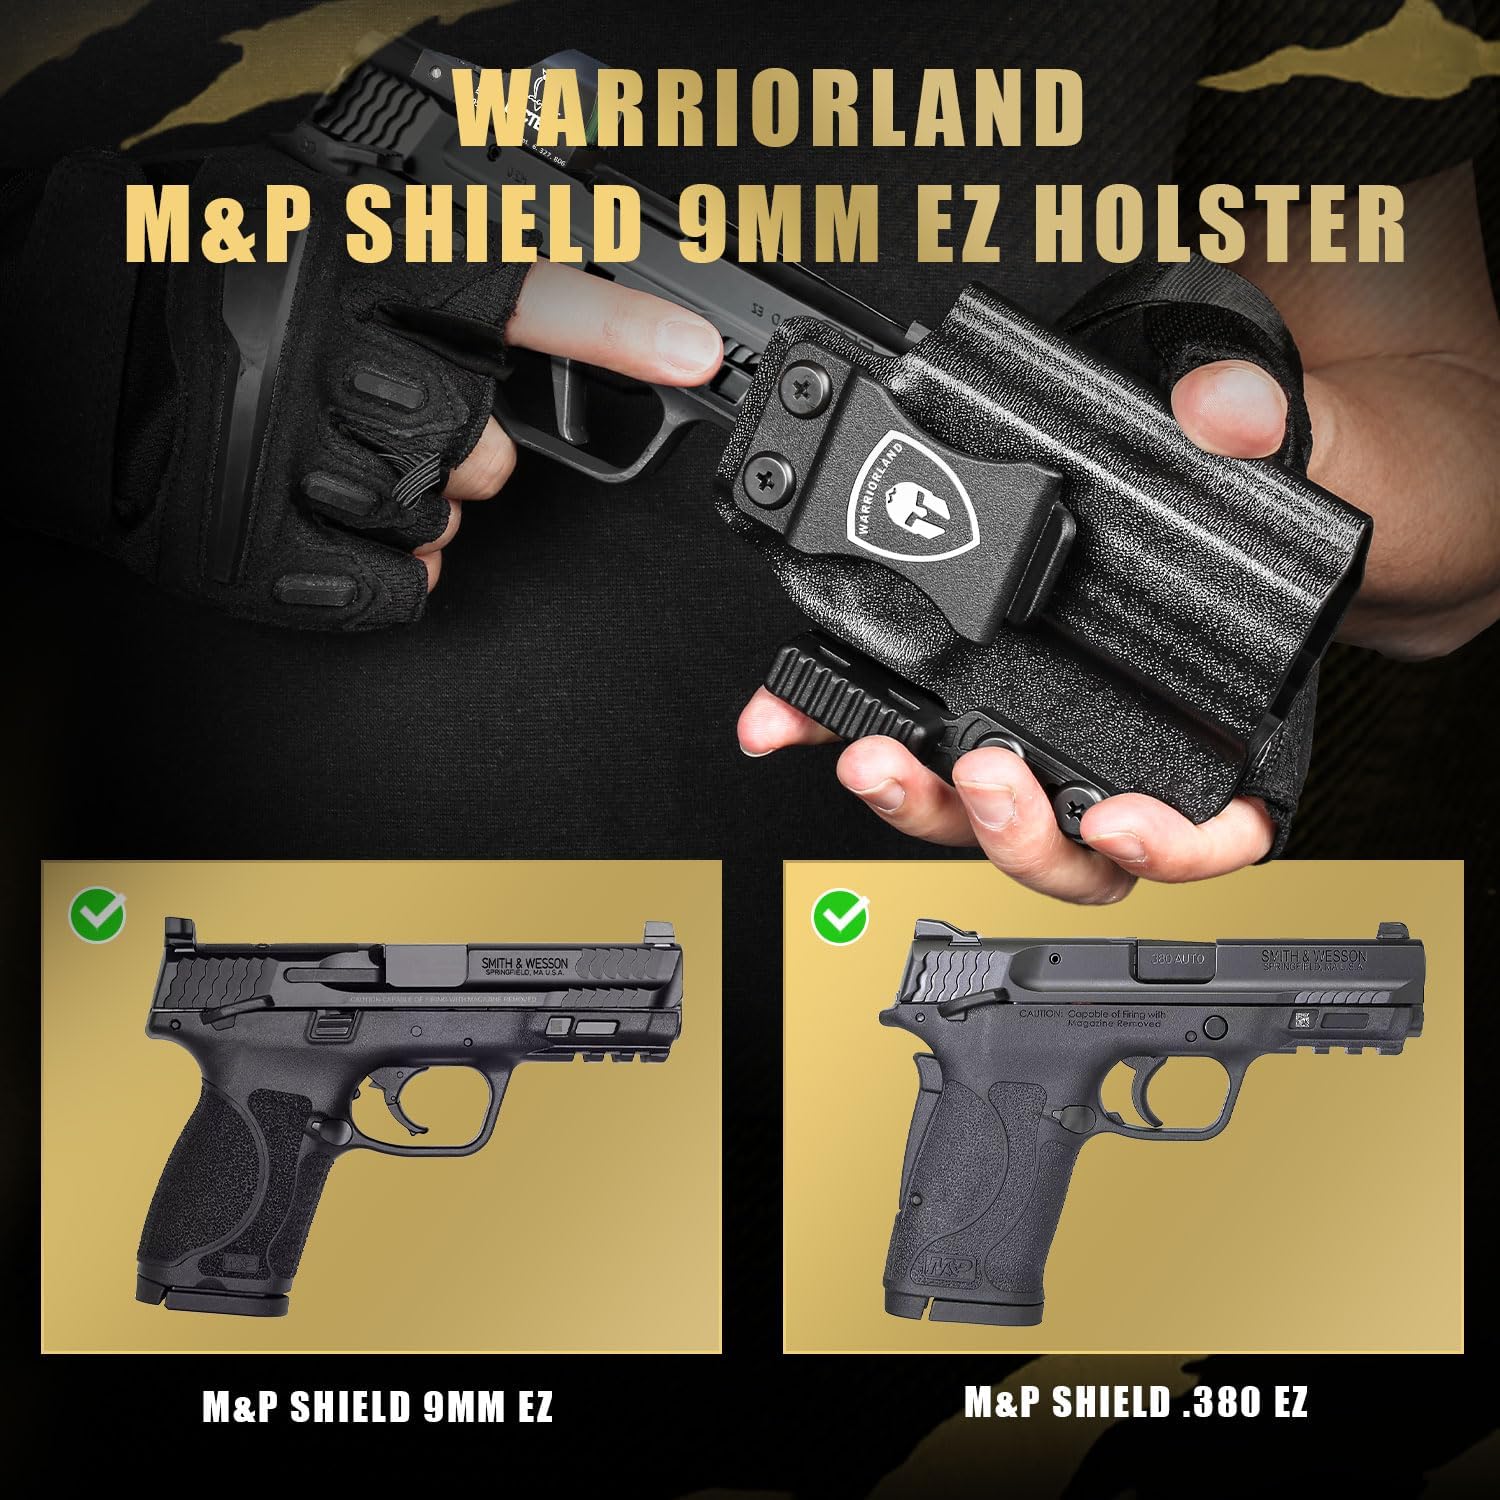 IWB Kydex Holster with Claw Attachment and Optic Cut Fit Smith & Wesson M&P Shield 9mm EZ / .380 EZ Pistol, Inside Waistband Appendix Carry M&P 9mm Shield EZ Holster, Adj. Cant & Retention|WARRIORLAND